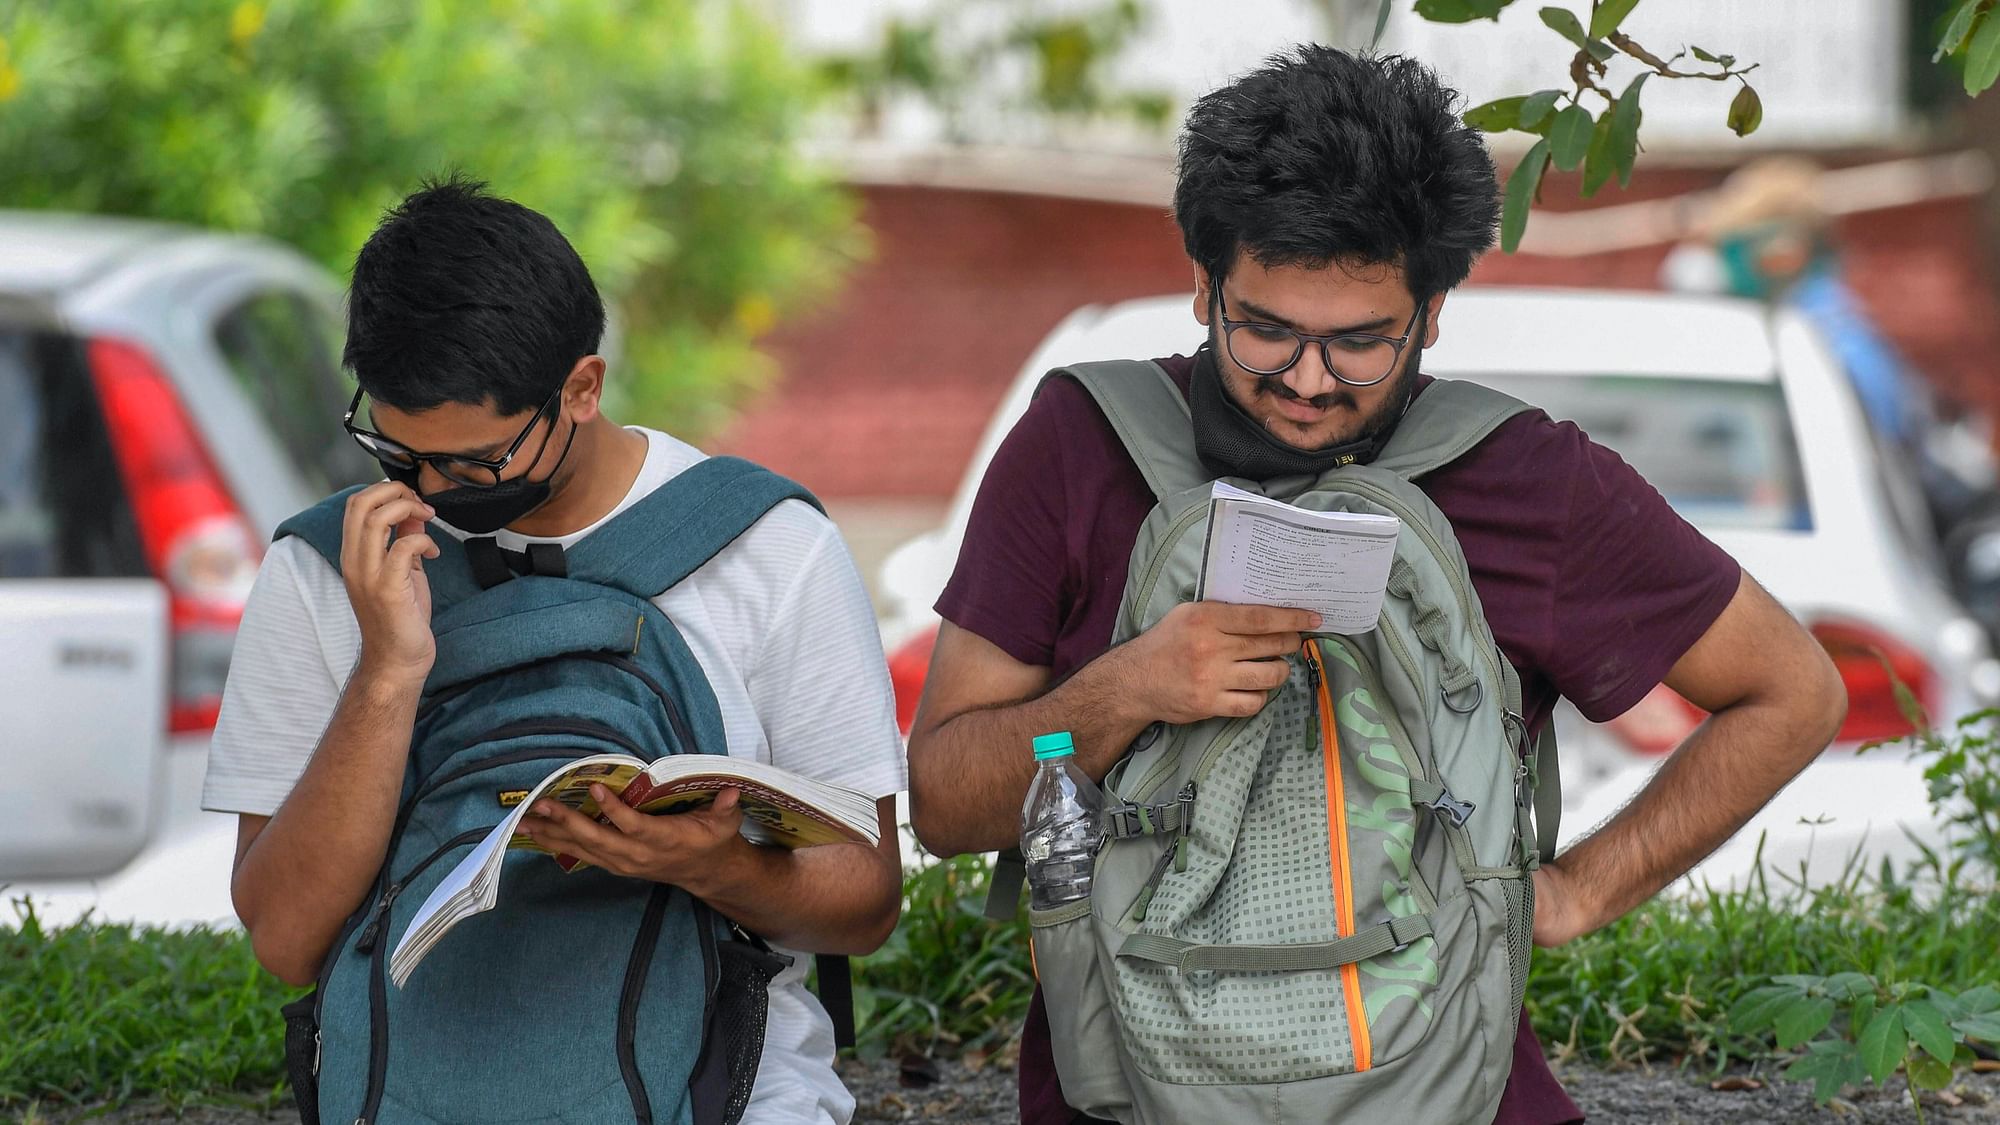 Students prepare for entrance exams. Image used for representation only.